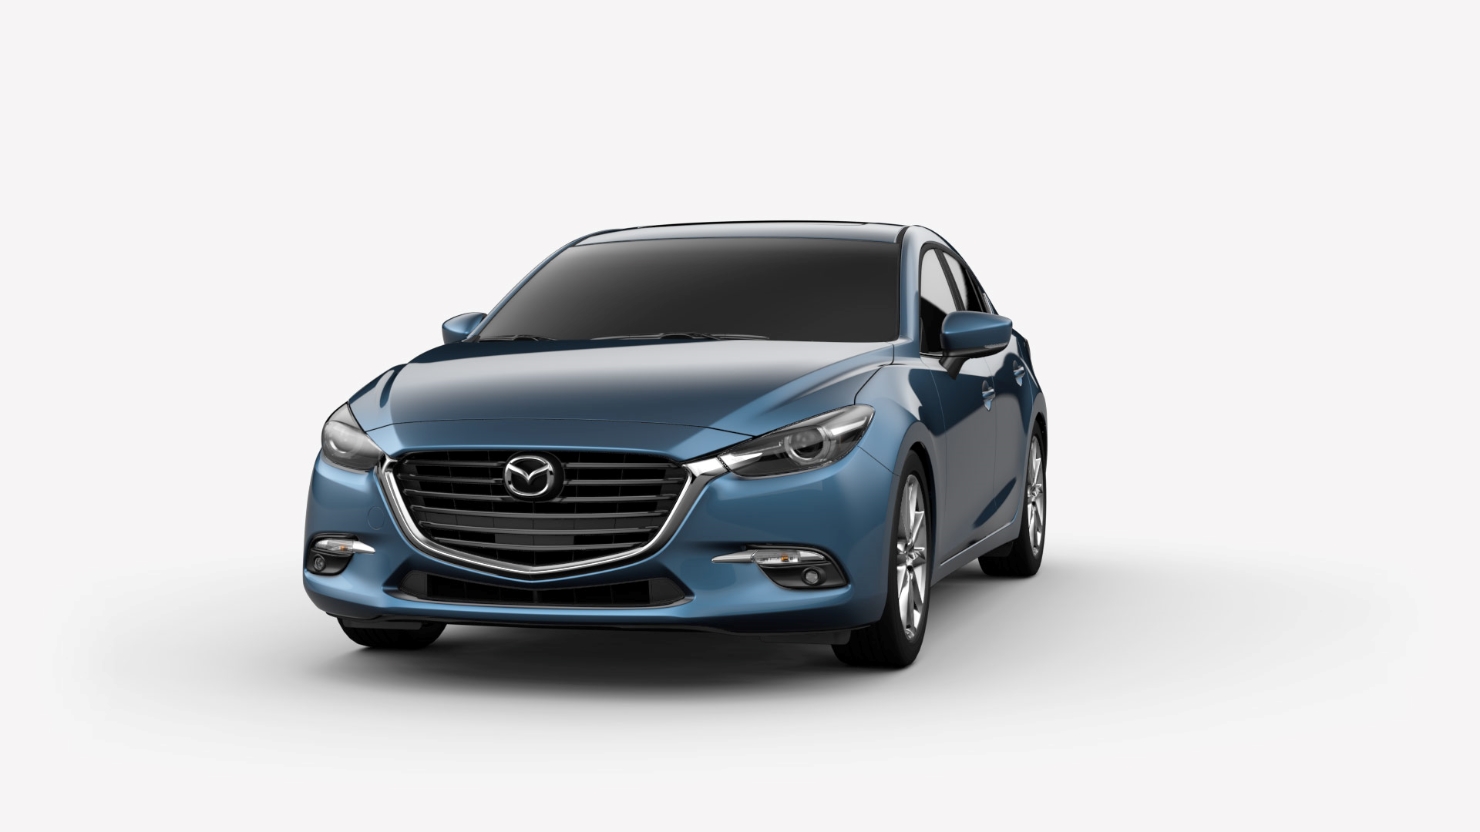 Premium Exterior Paint choices for the 2018 Mazda3